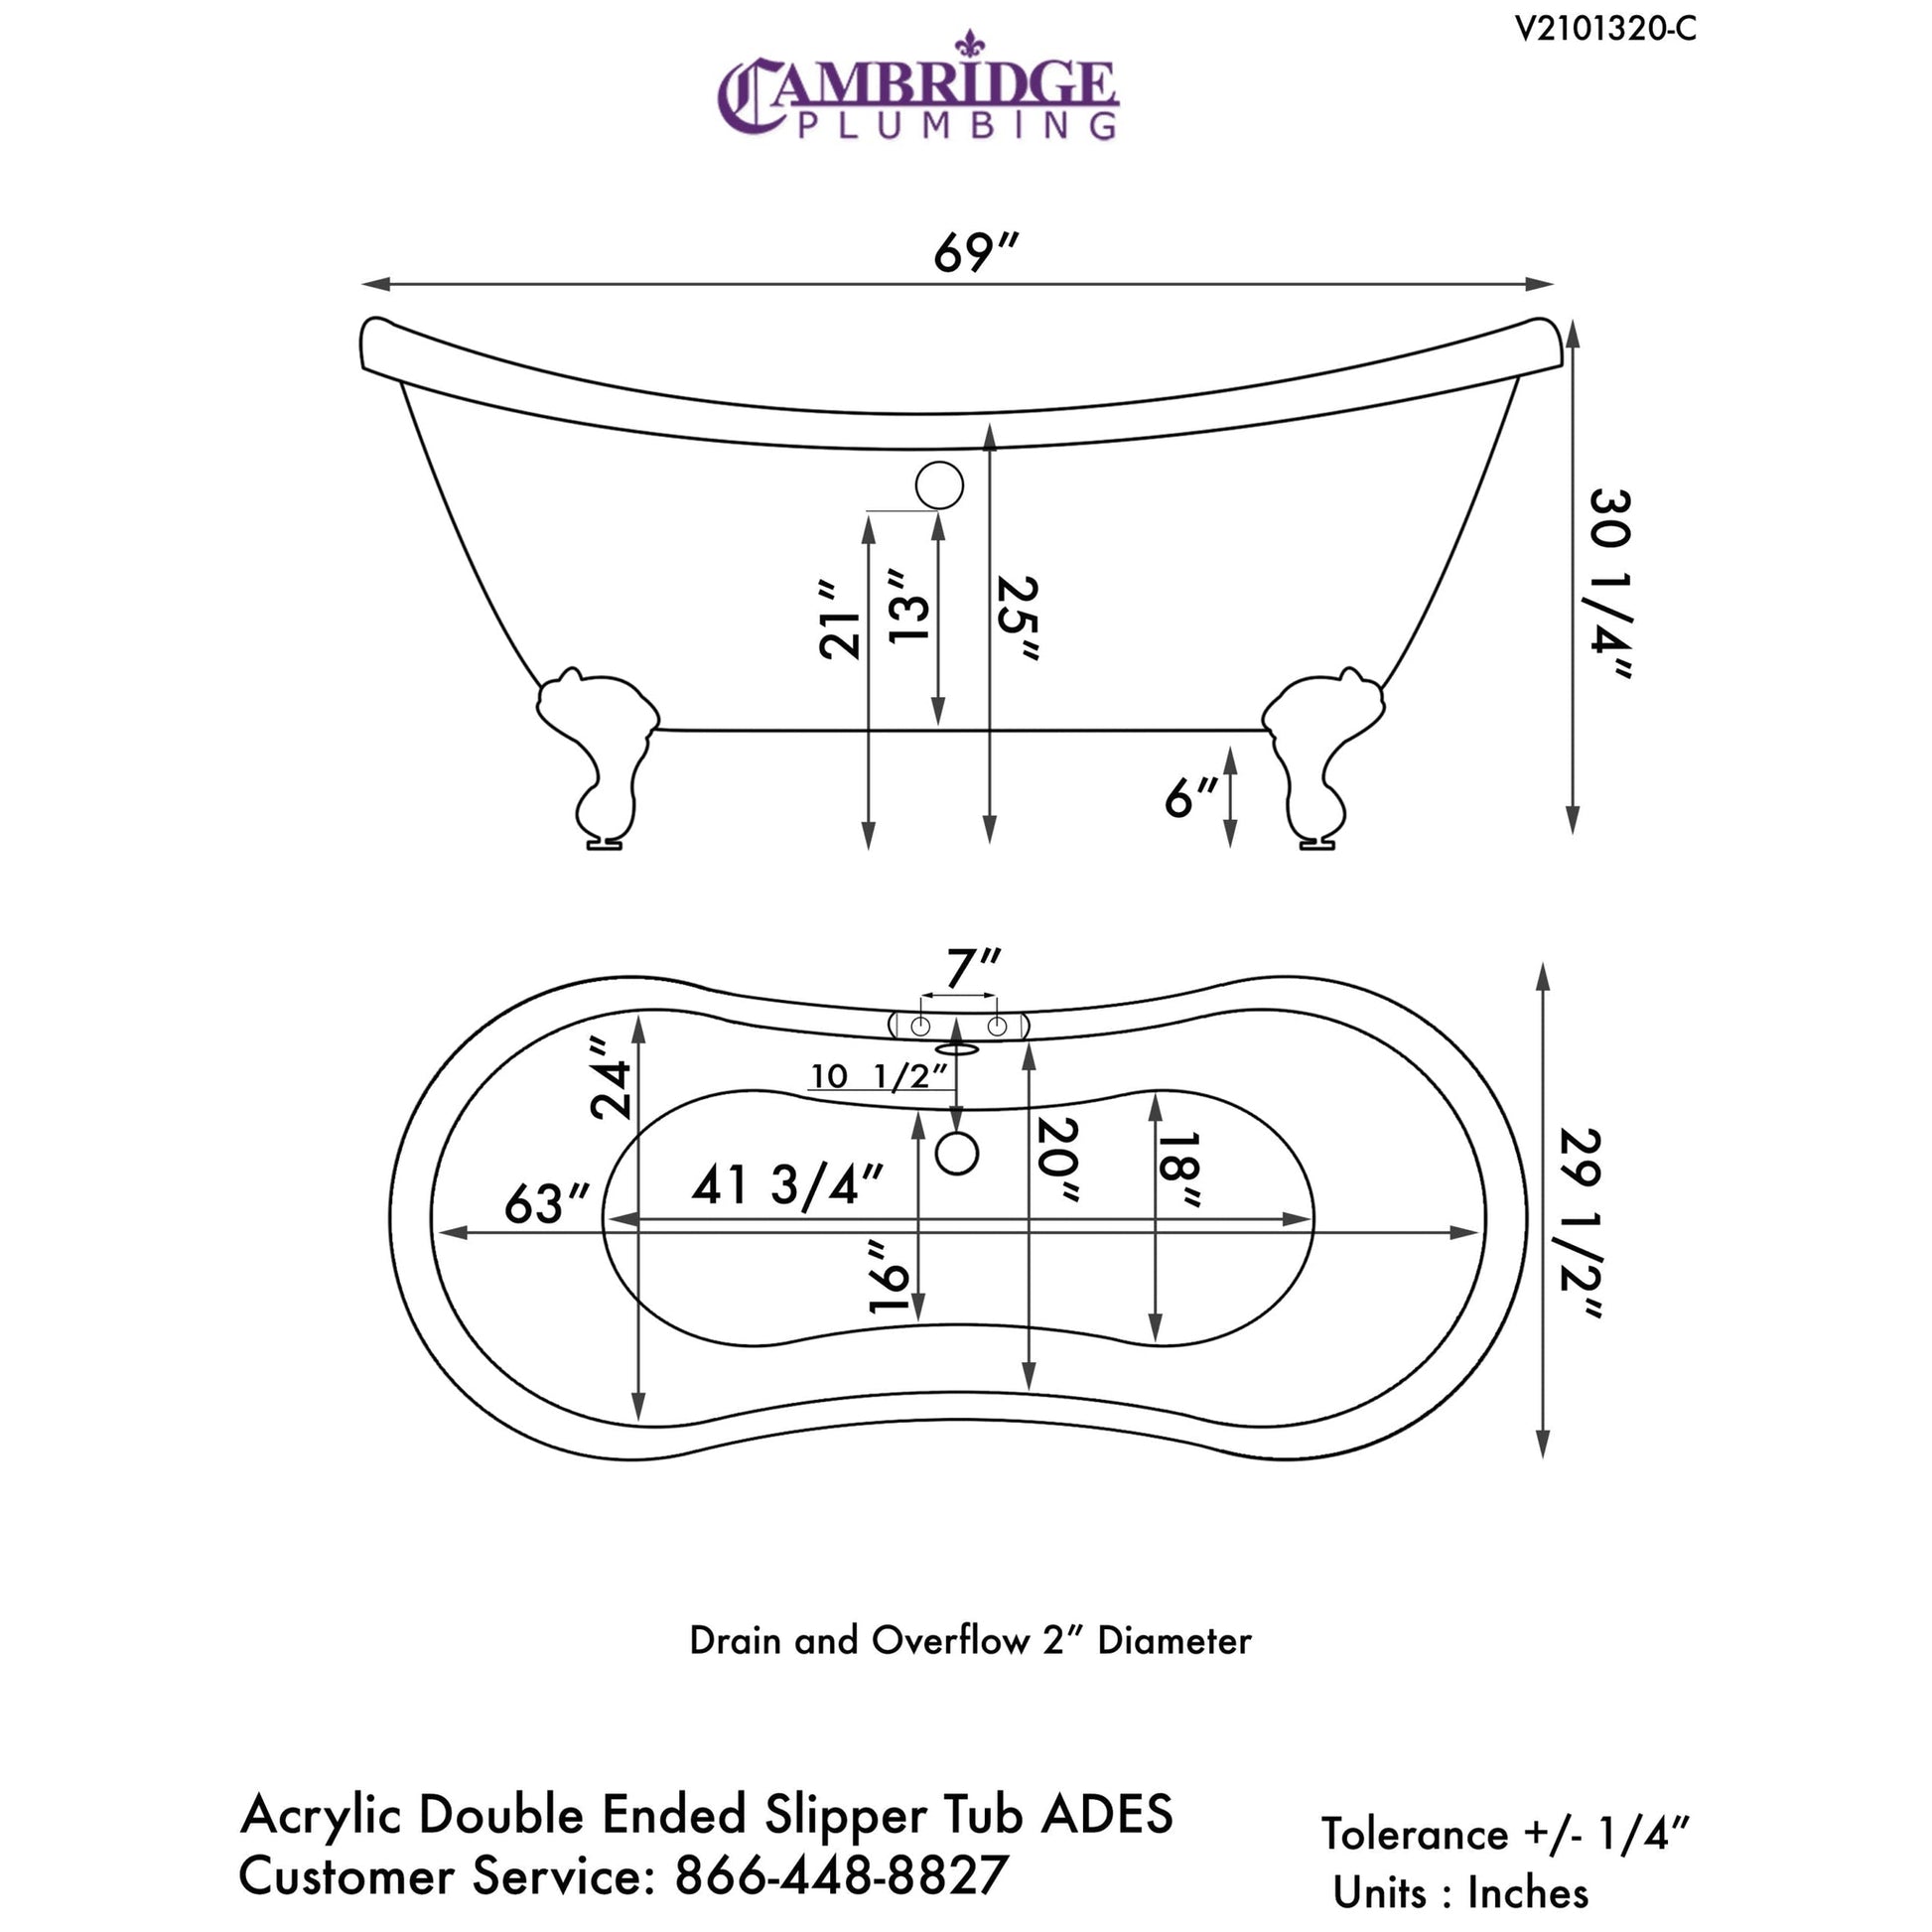 Cambridge Plumbing 69" White Double Slipper Clawfoot Acrylic Bathtub With Deck Holes With Polished Chrome Feet